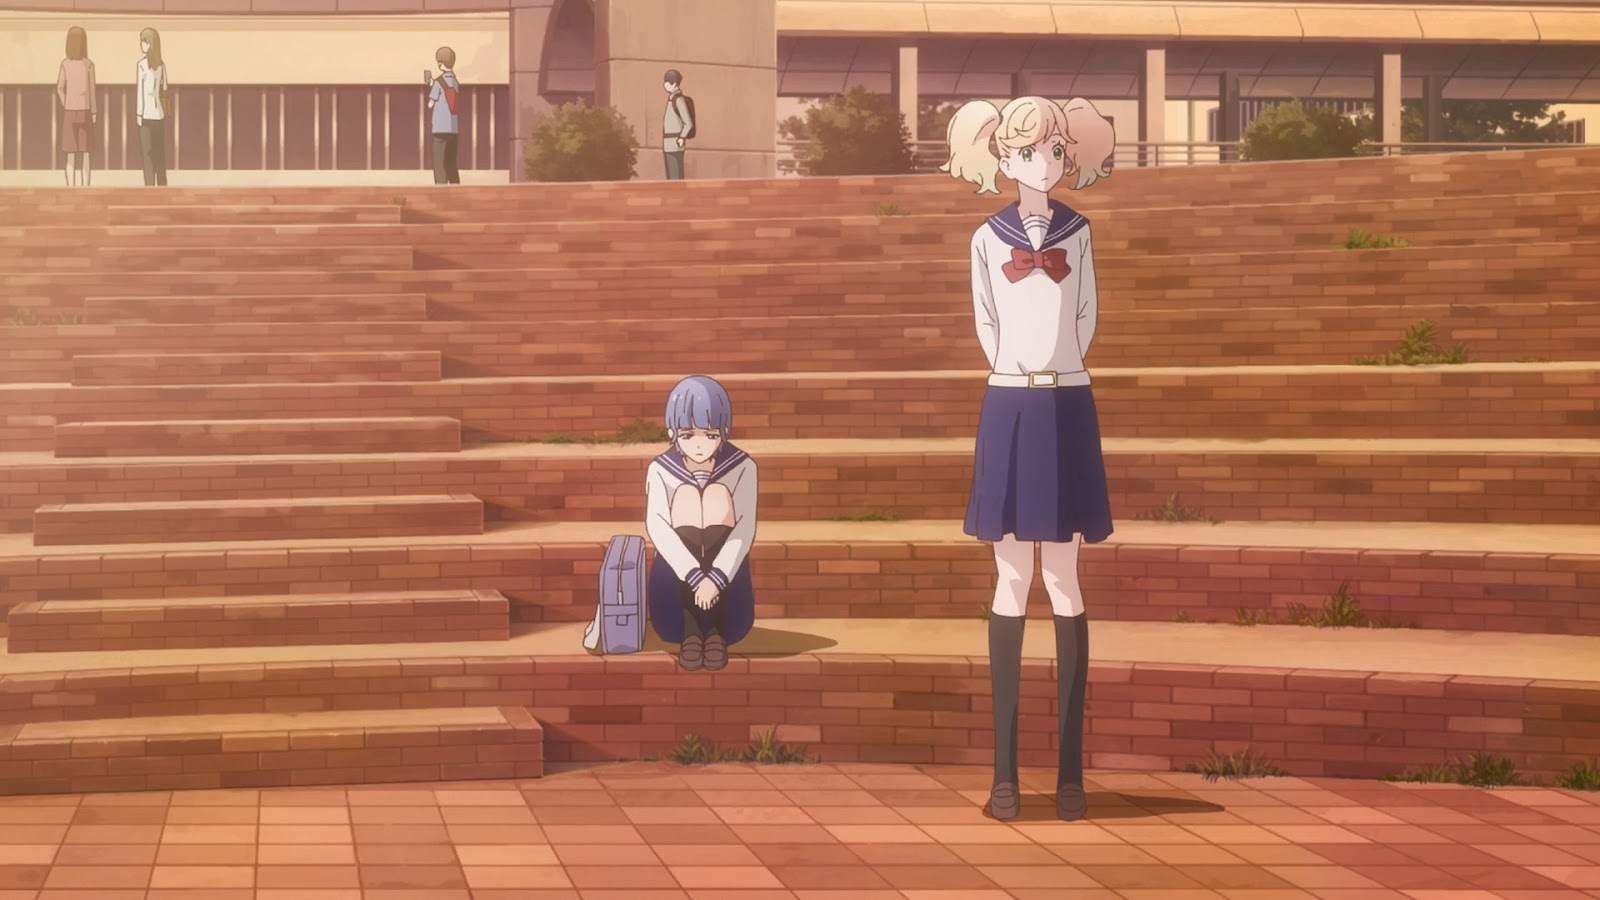 Ai sitting on stairs outside the school with her legs pulled up. Sarasa is standing out in front of her.